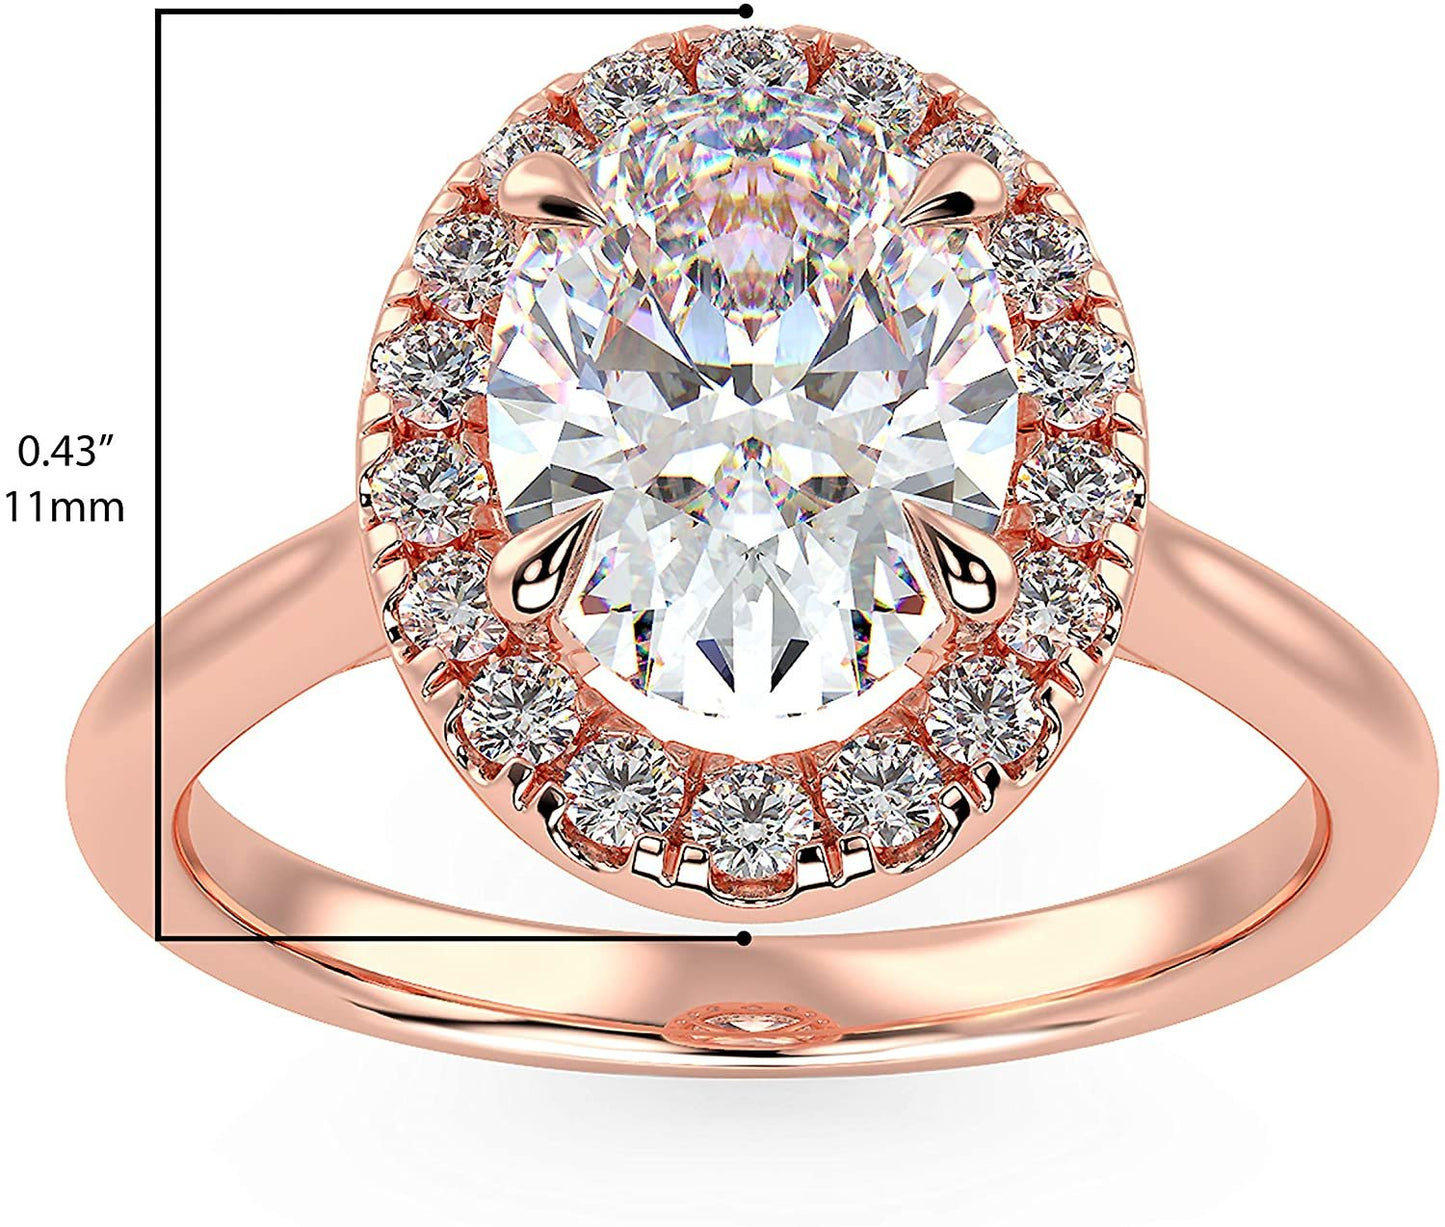 IGI Certified 14K Rose Gold 1-3/4 Carat Oval Lab Created Diamond Vintage-Inspired Halo Engagement Ring (G-H Color, VS1-VS2 Clarity, 1.5 Carat Center Stone) - Size 9